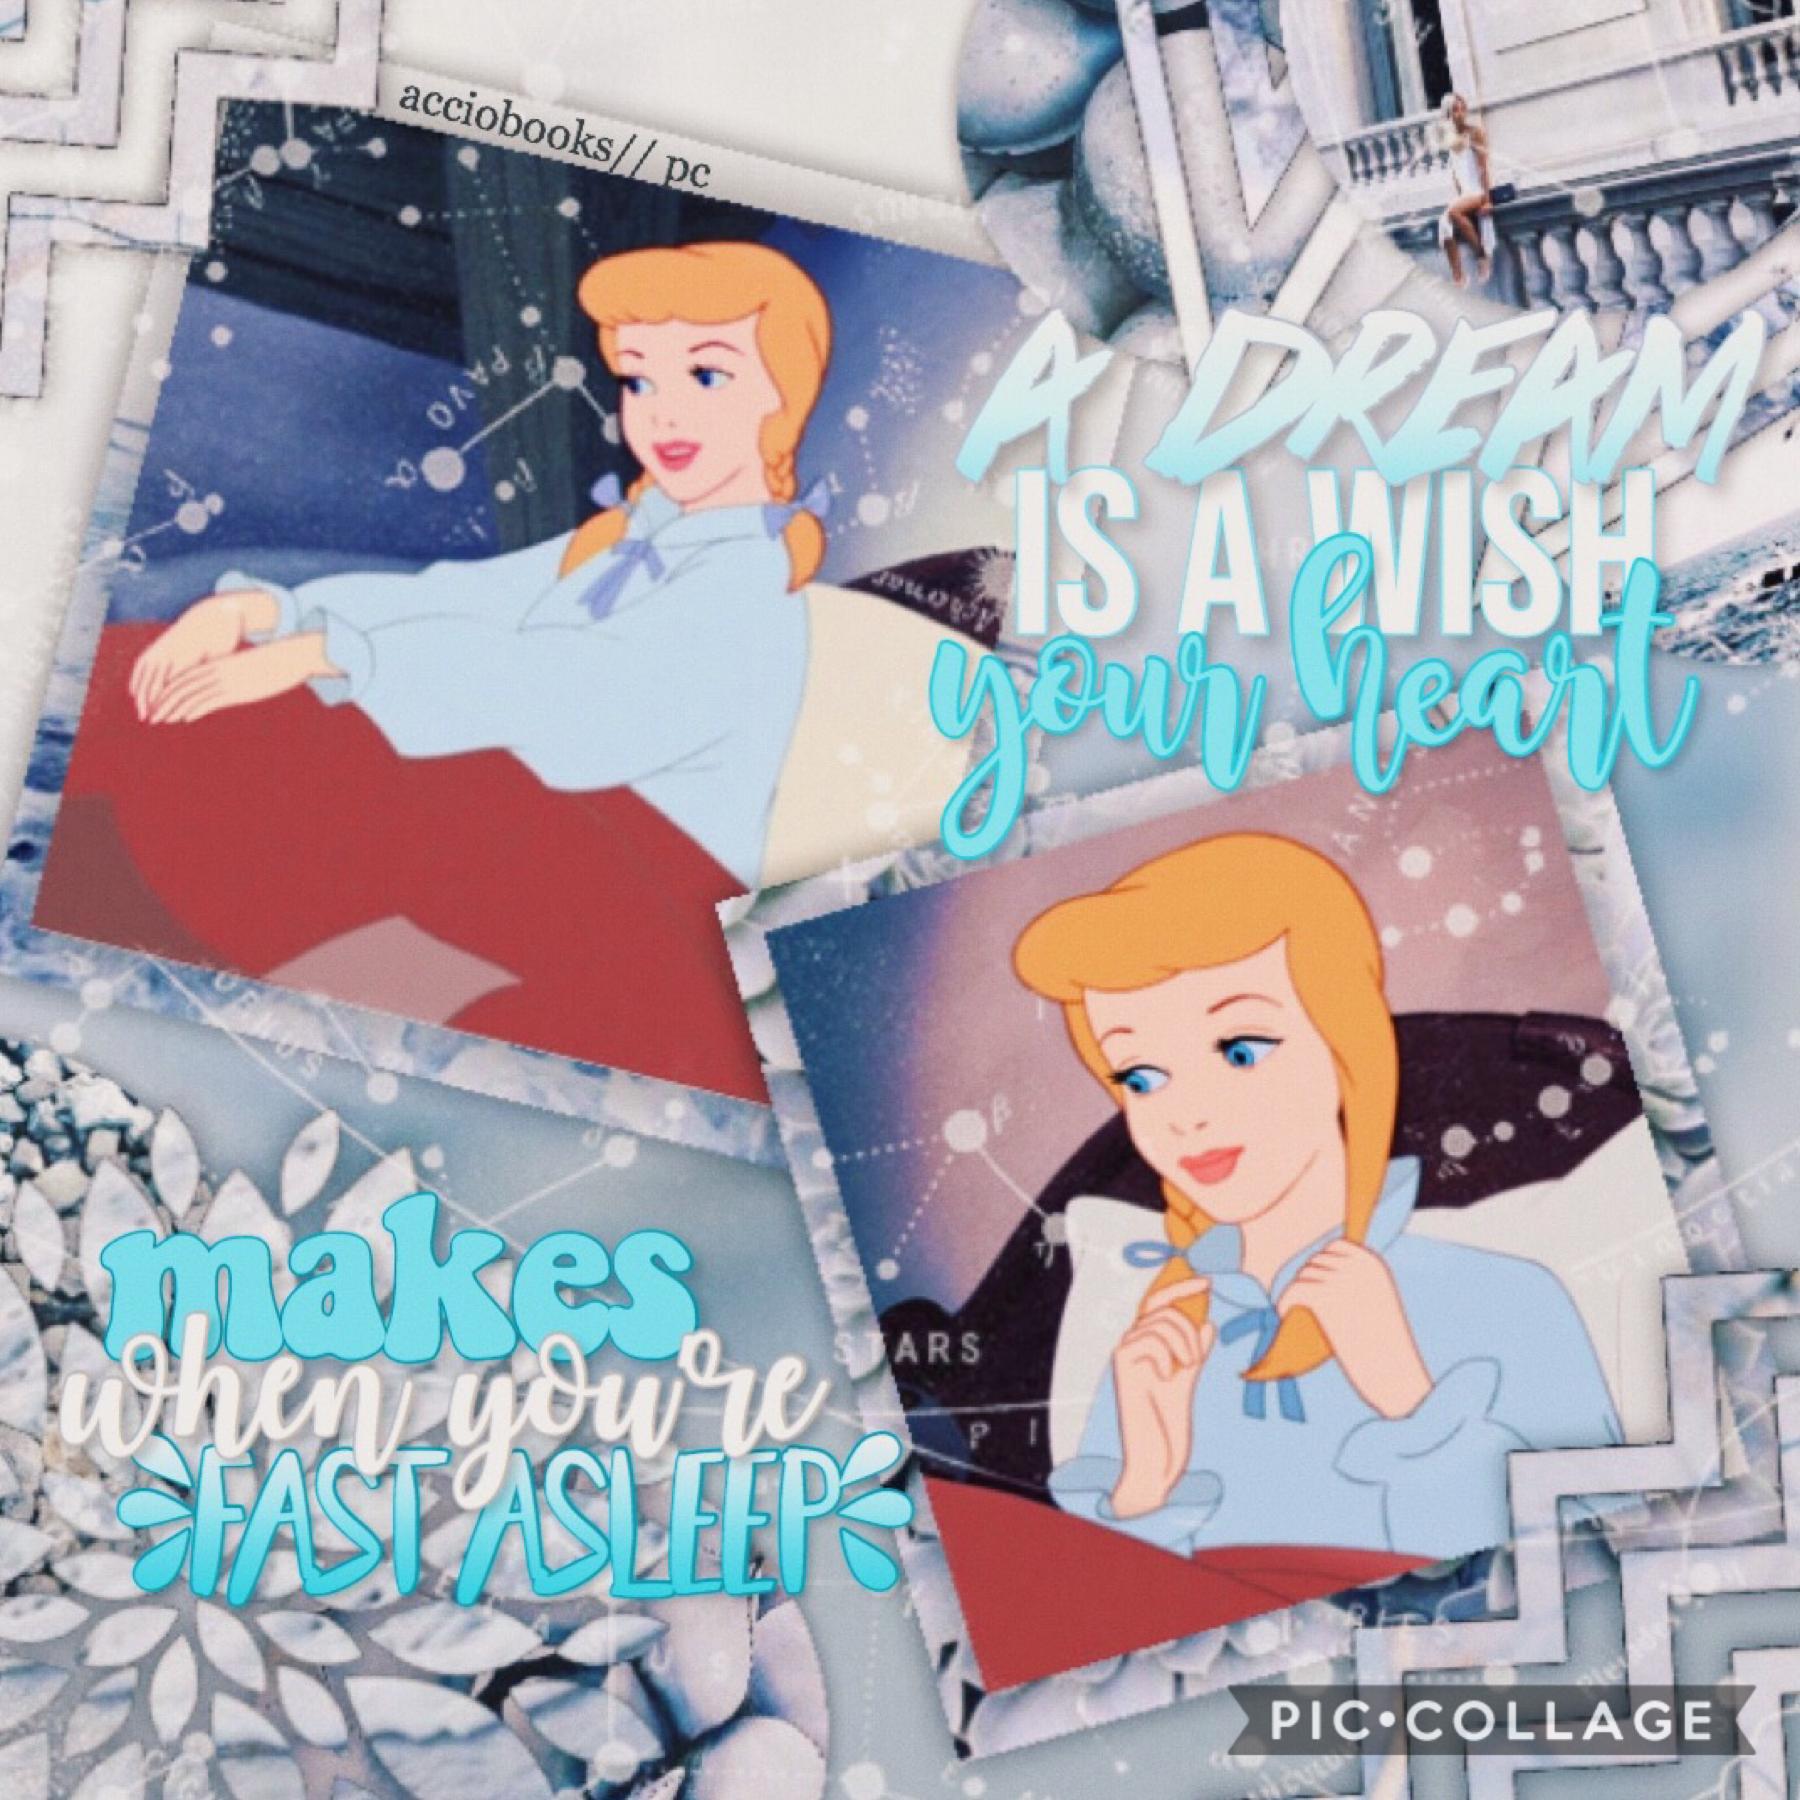 tap 👸🏼
hello everyone! Here’s a Disney edit because I LOVE Disney sm 💞 also, please stay safe and practice healthy habits! I don’t want any of you guys to get sick. Love, Kenzie 🌟